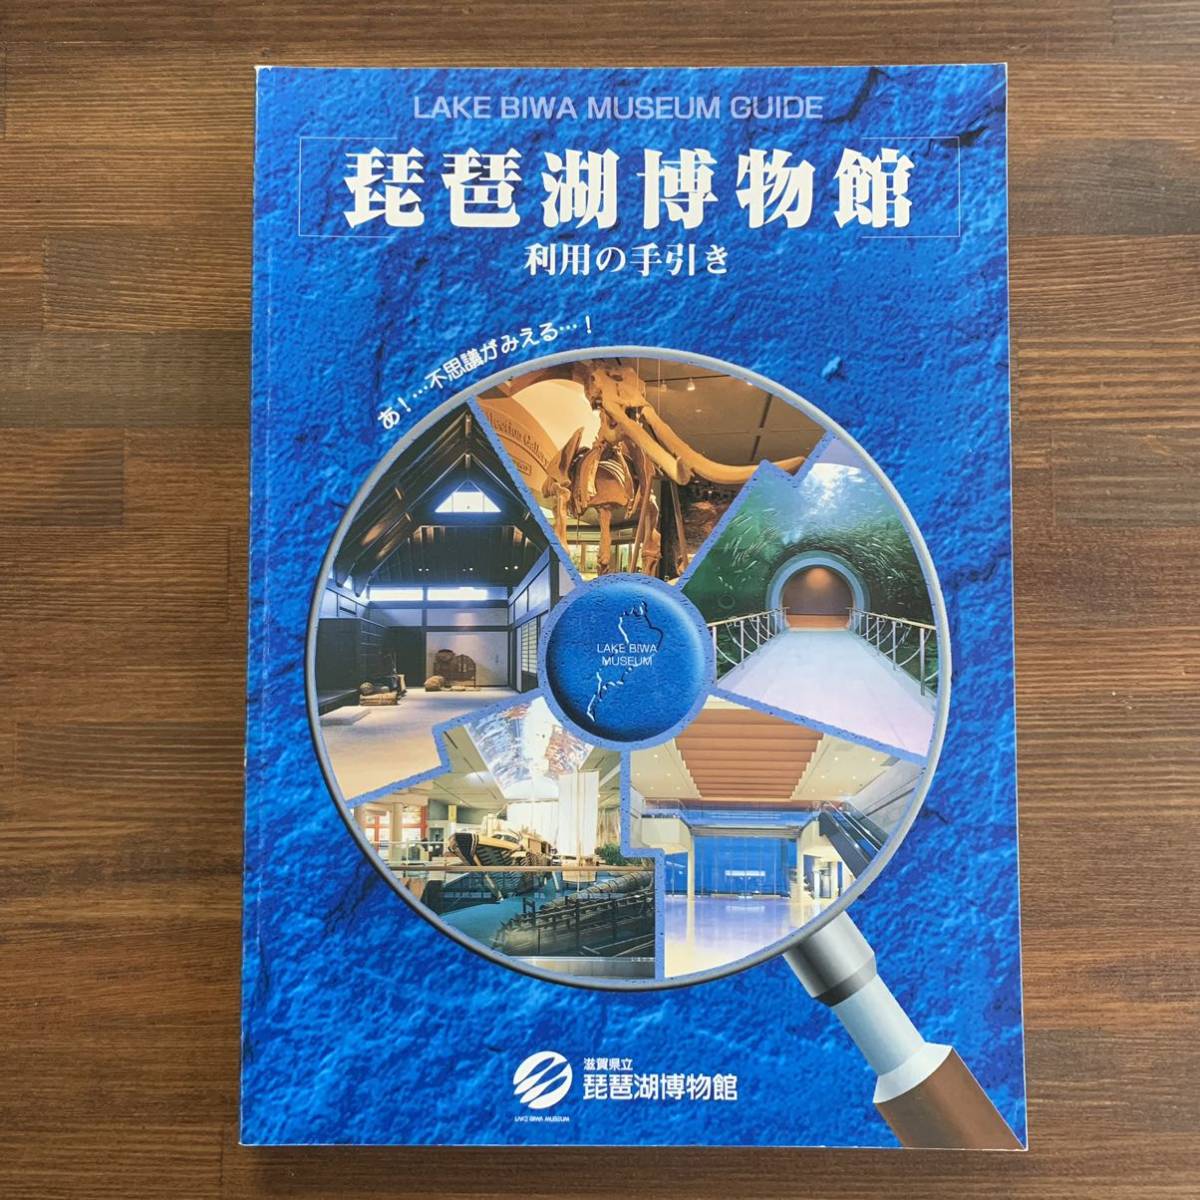 Lake Biwa Museum User's Guide Ah!... See the Wonders...! 2nd Edition Shiga Prefectural Lake Biwa Museum Published March 1998, Painting, Art Book, Collection, Catalog